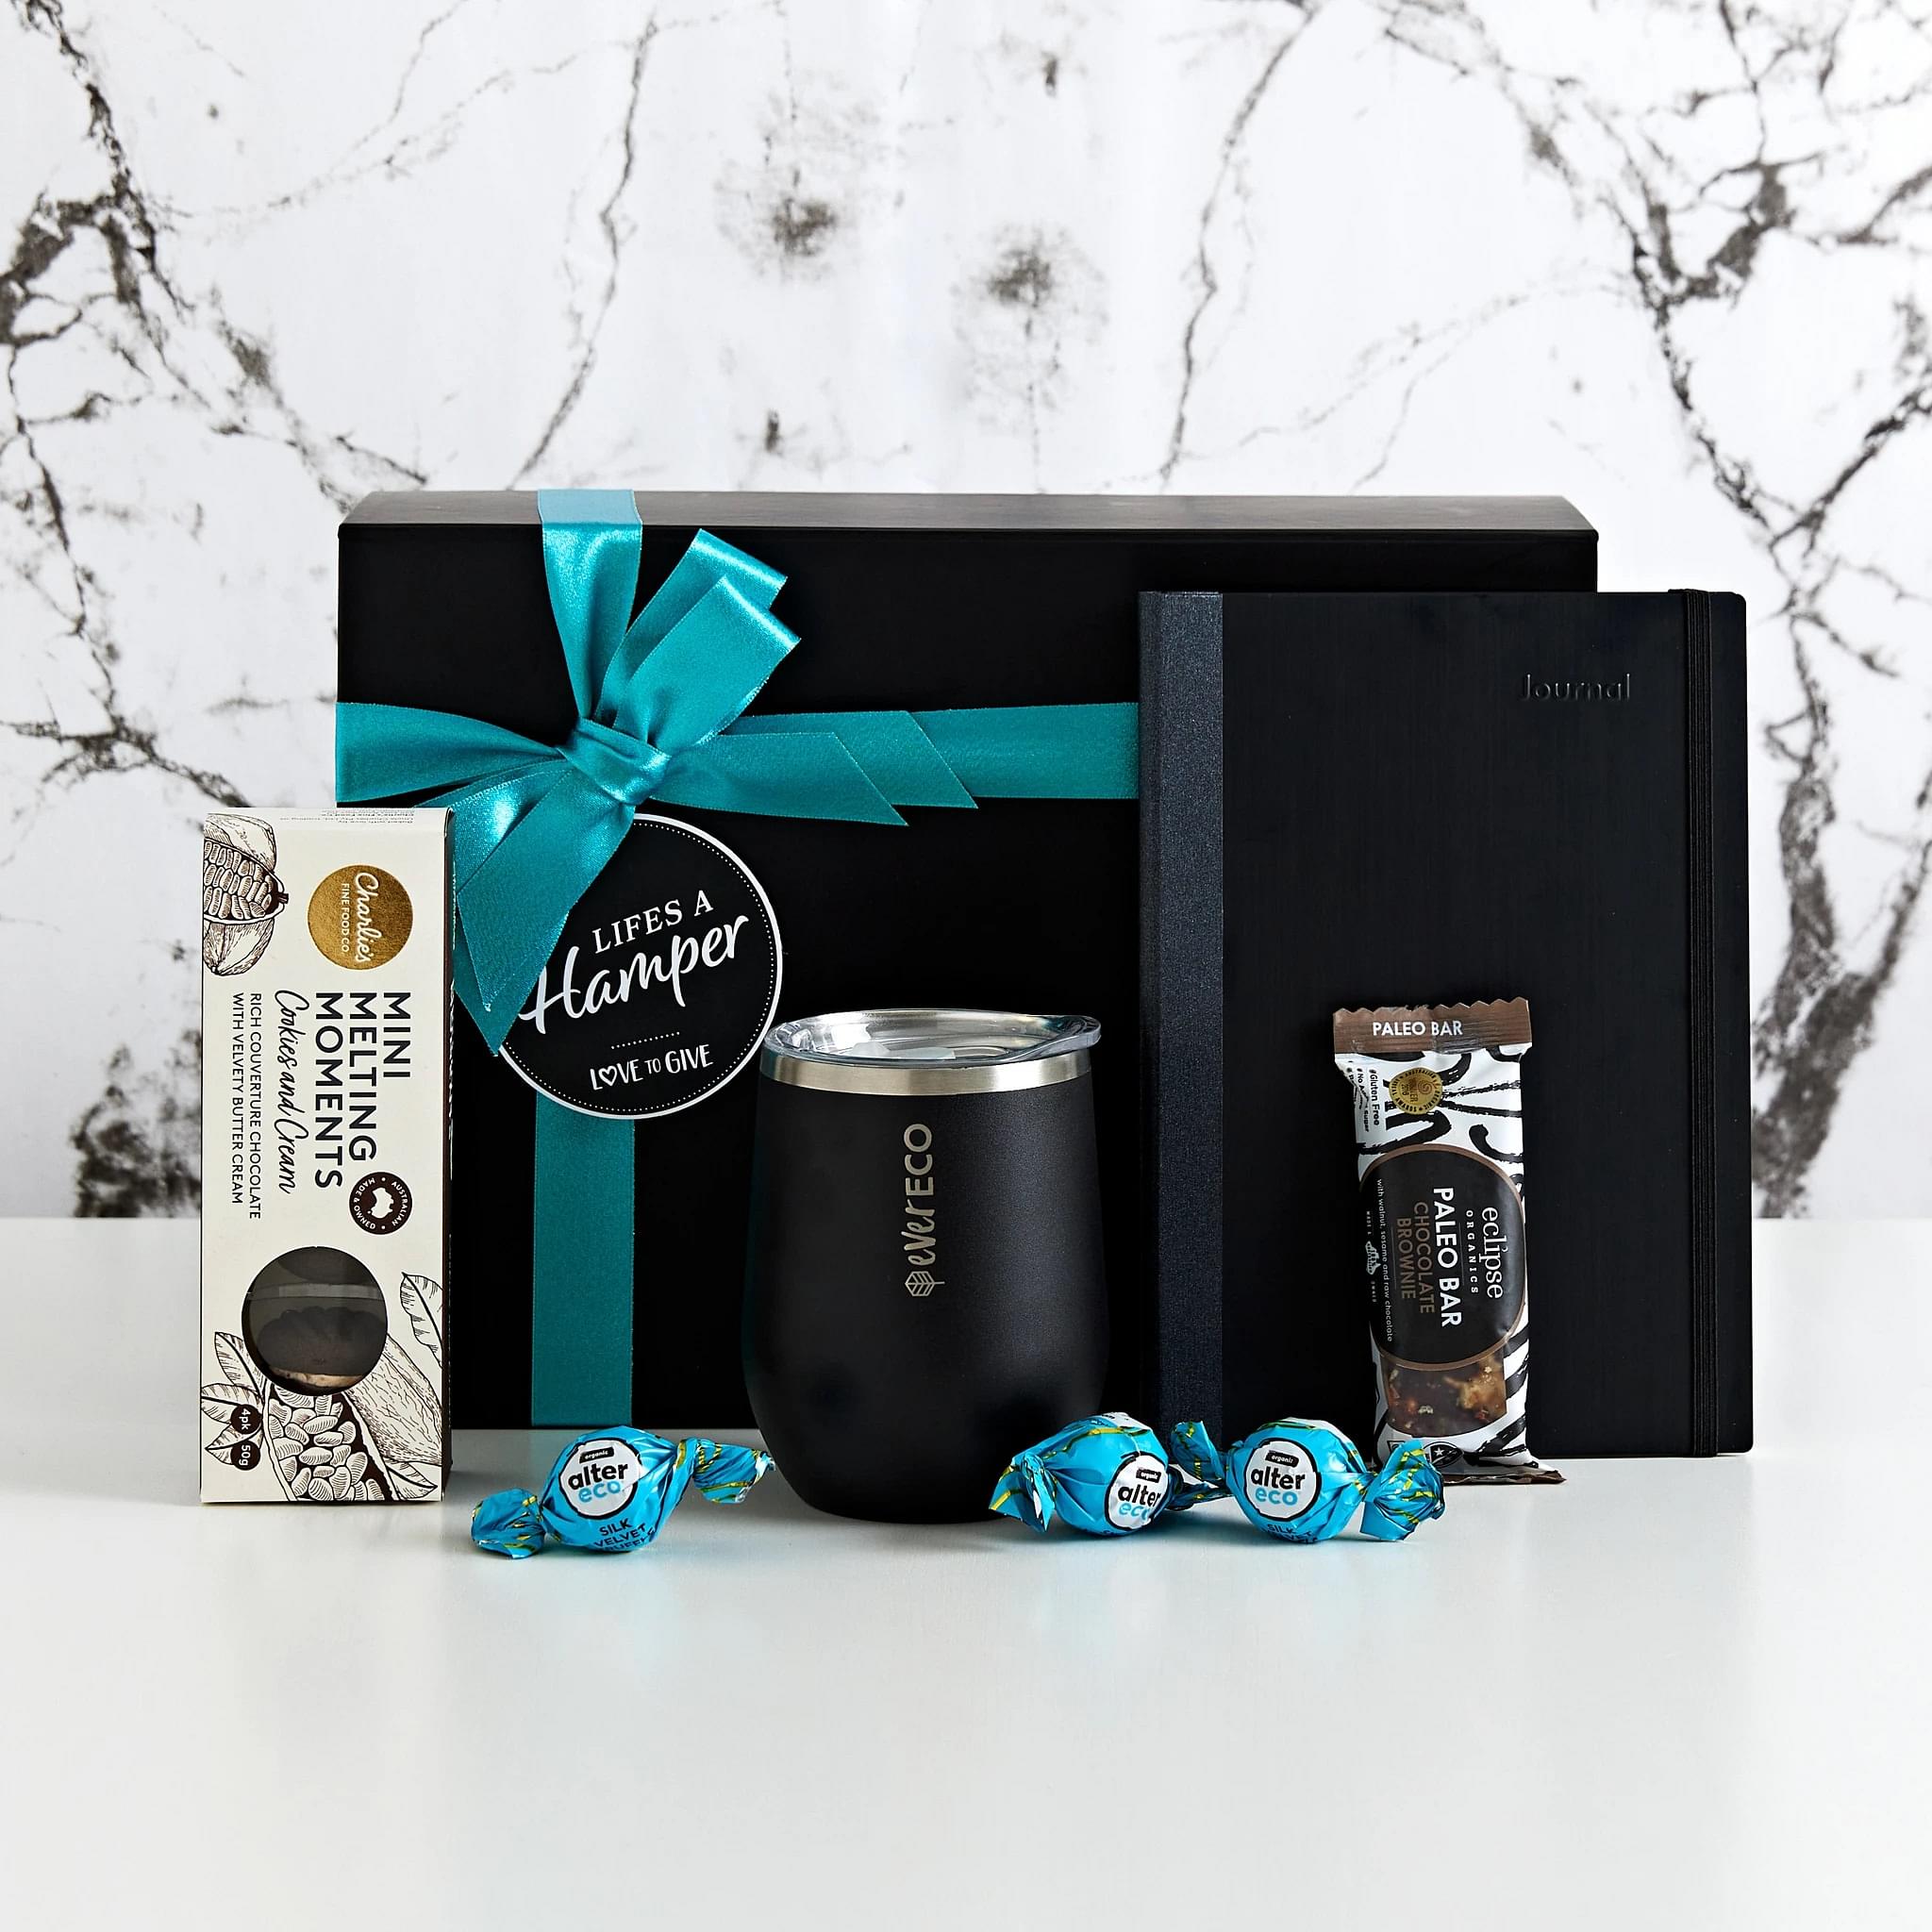 Working From Home Gift Hamper